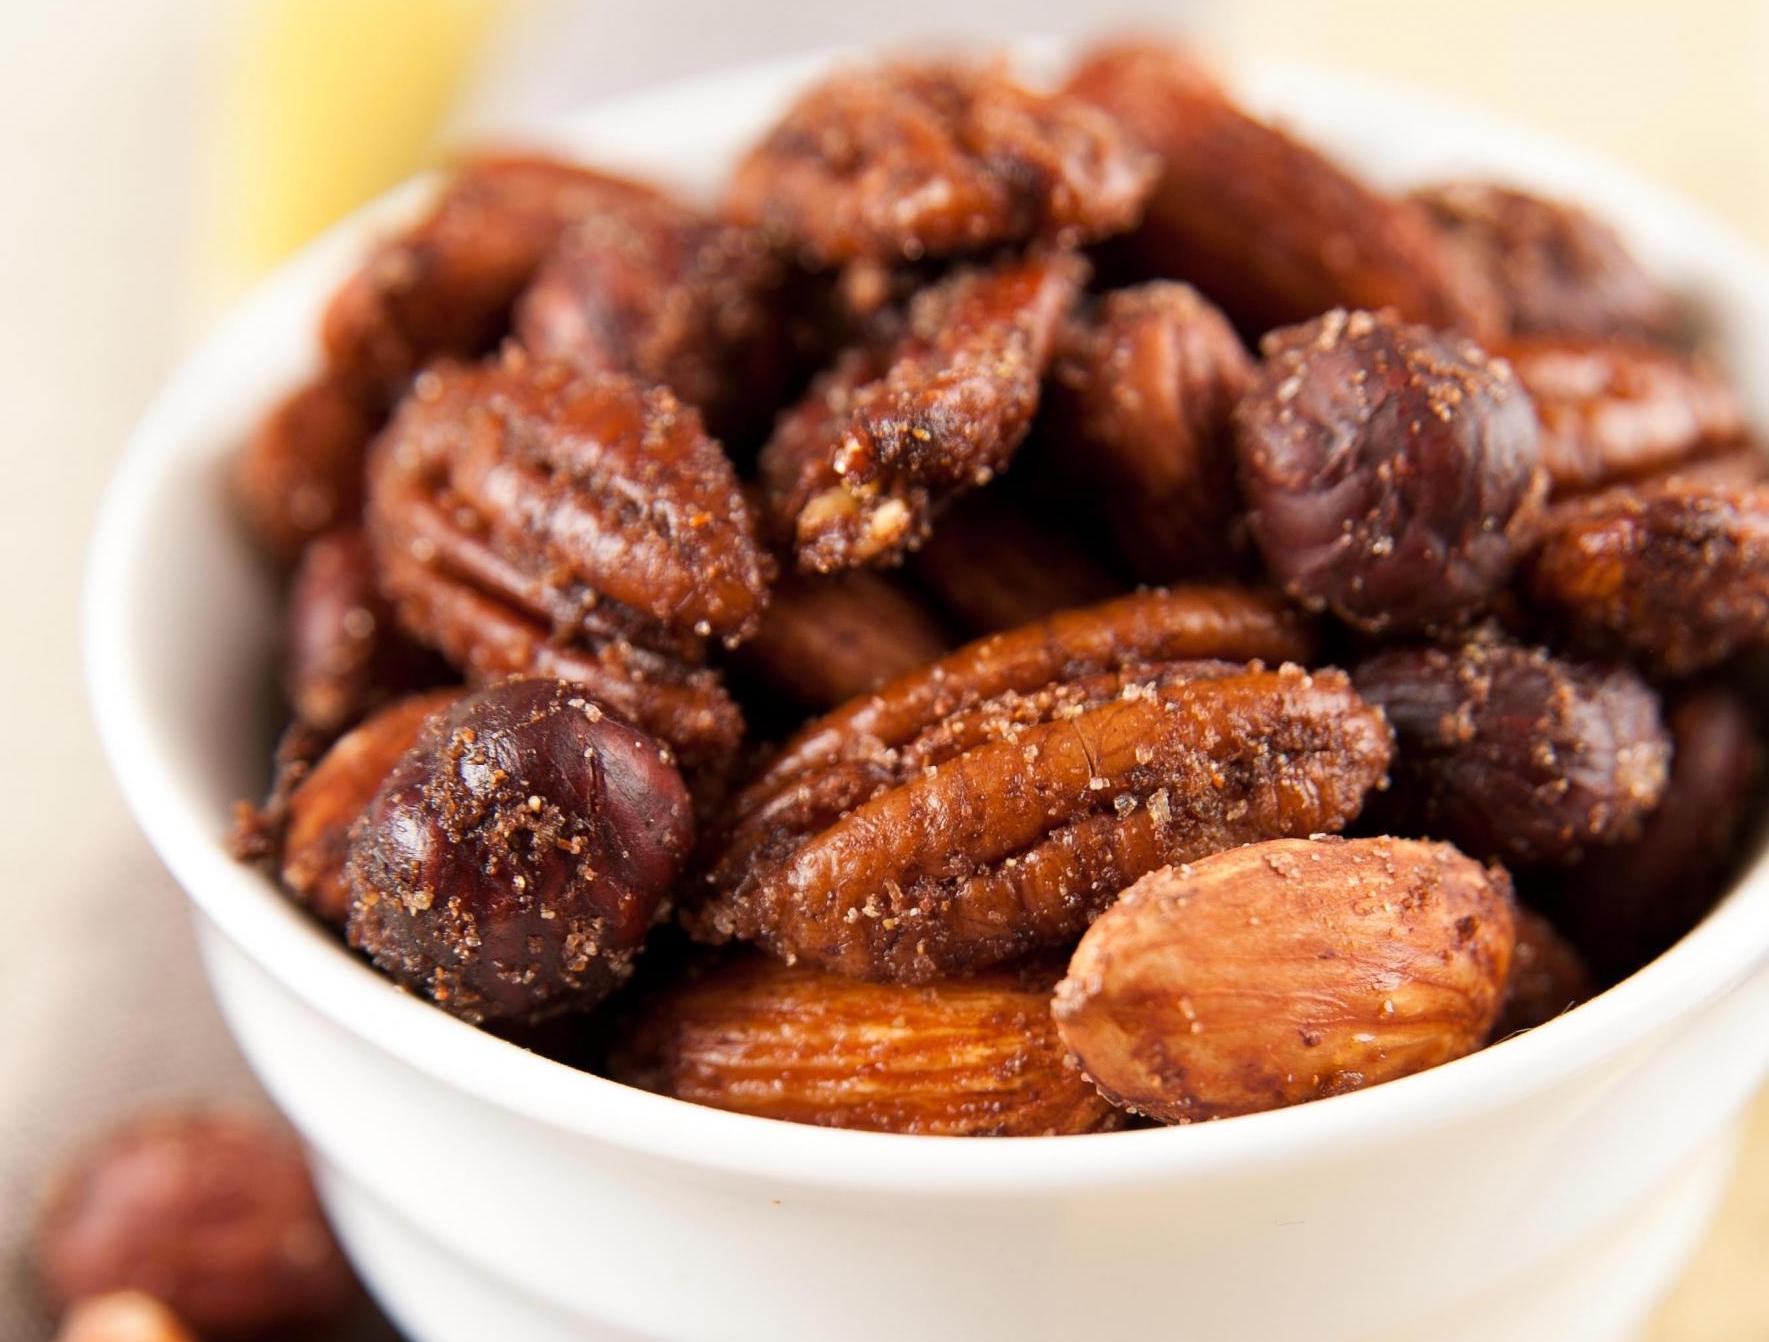 spiced nuts (almonds, hazelnuts, and pecans) in a white dish